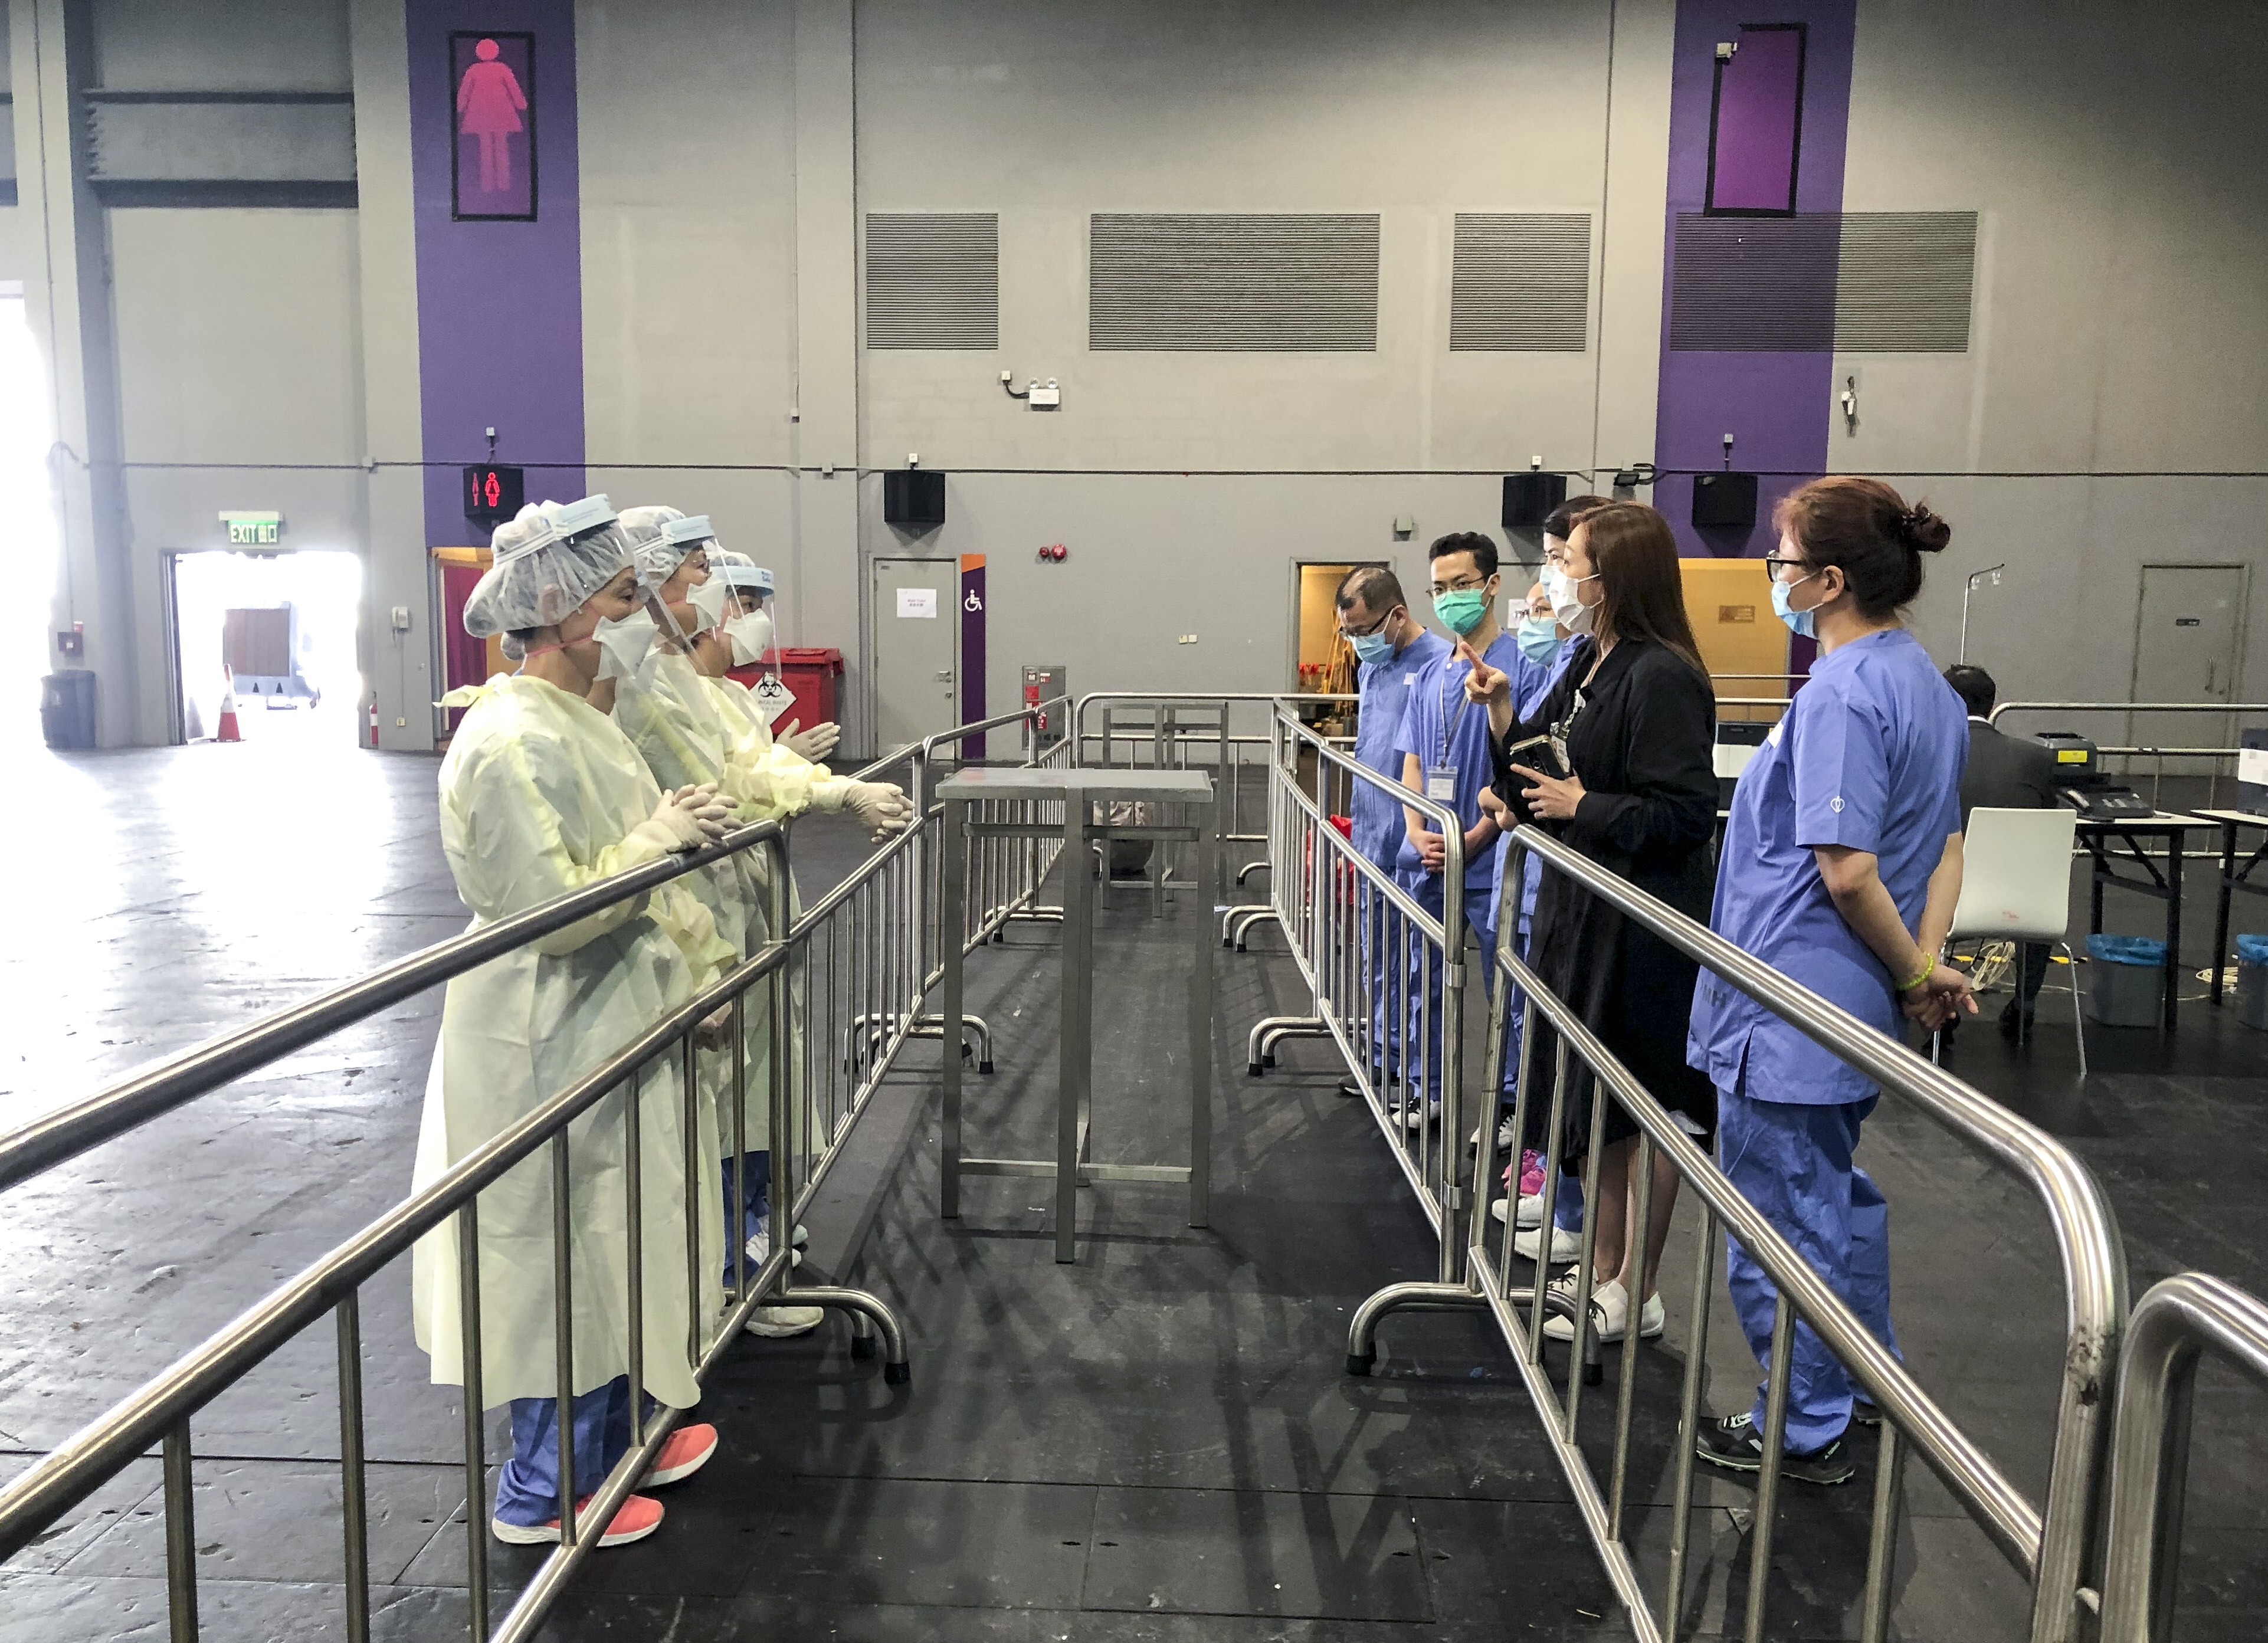 Staff working in different areas at the expo testing facility were separated by barriers. Photo: Handout